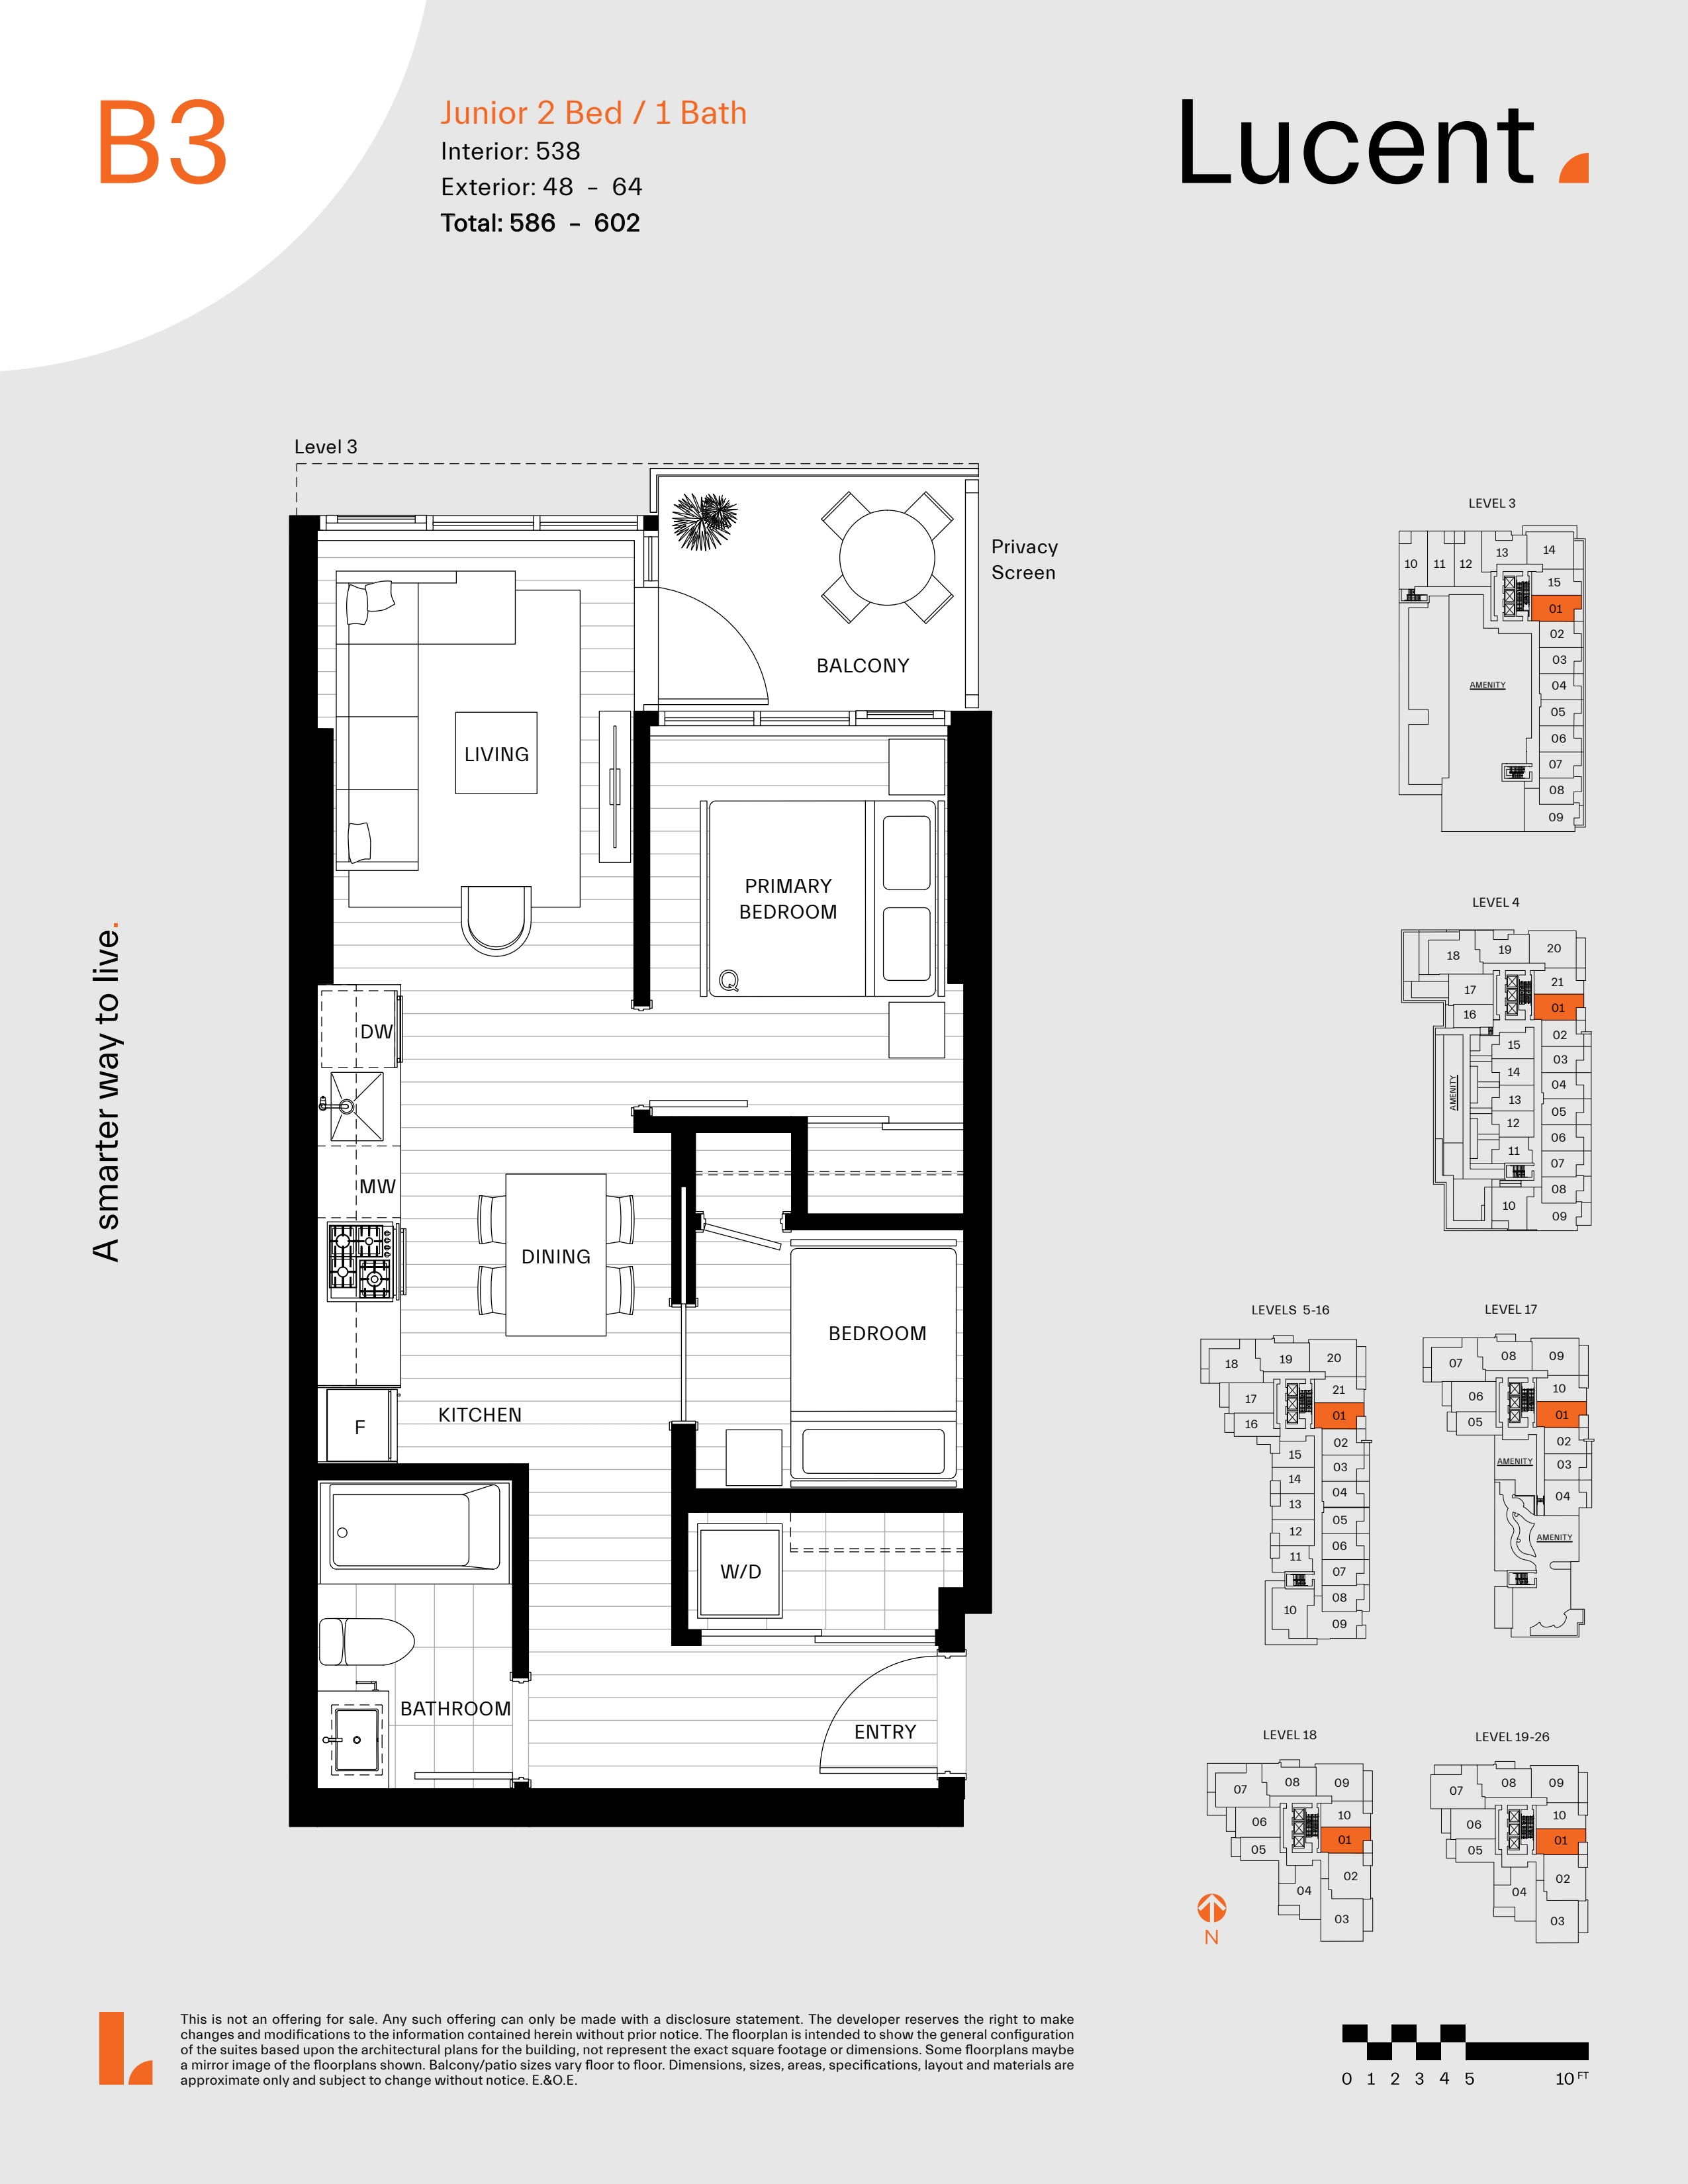 B3 Floor Plan of Lucent Condos with undefined beds